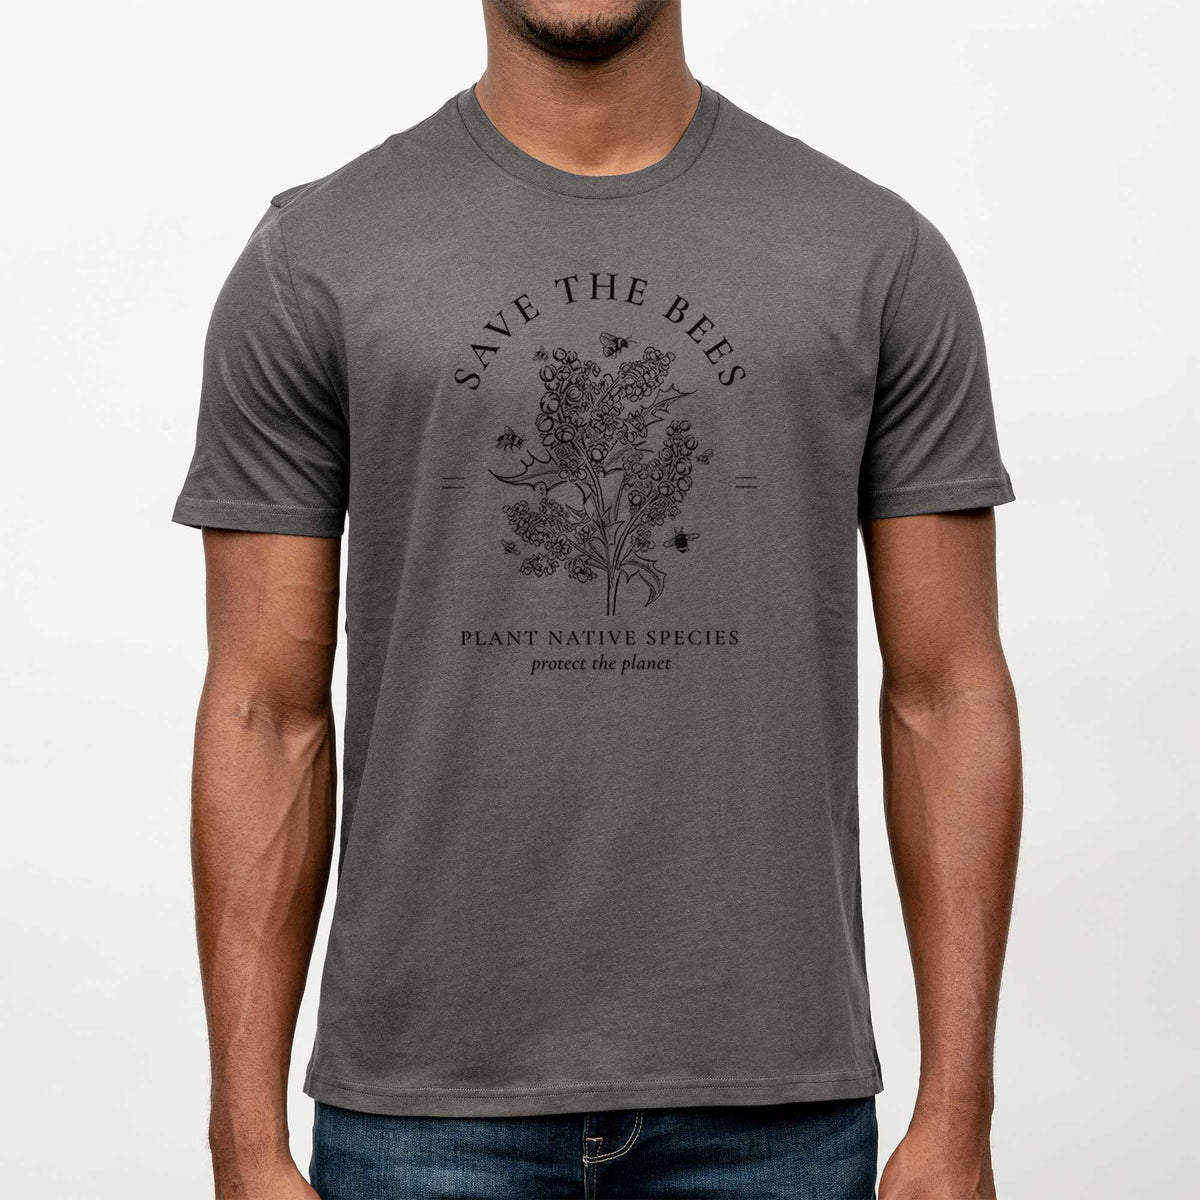 Save the Bees - Plant Native Species -  Mineral Wash 100% Organic Cotton Short Sleeve